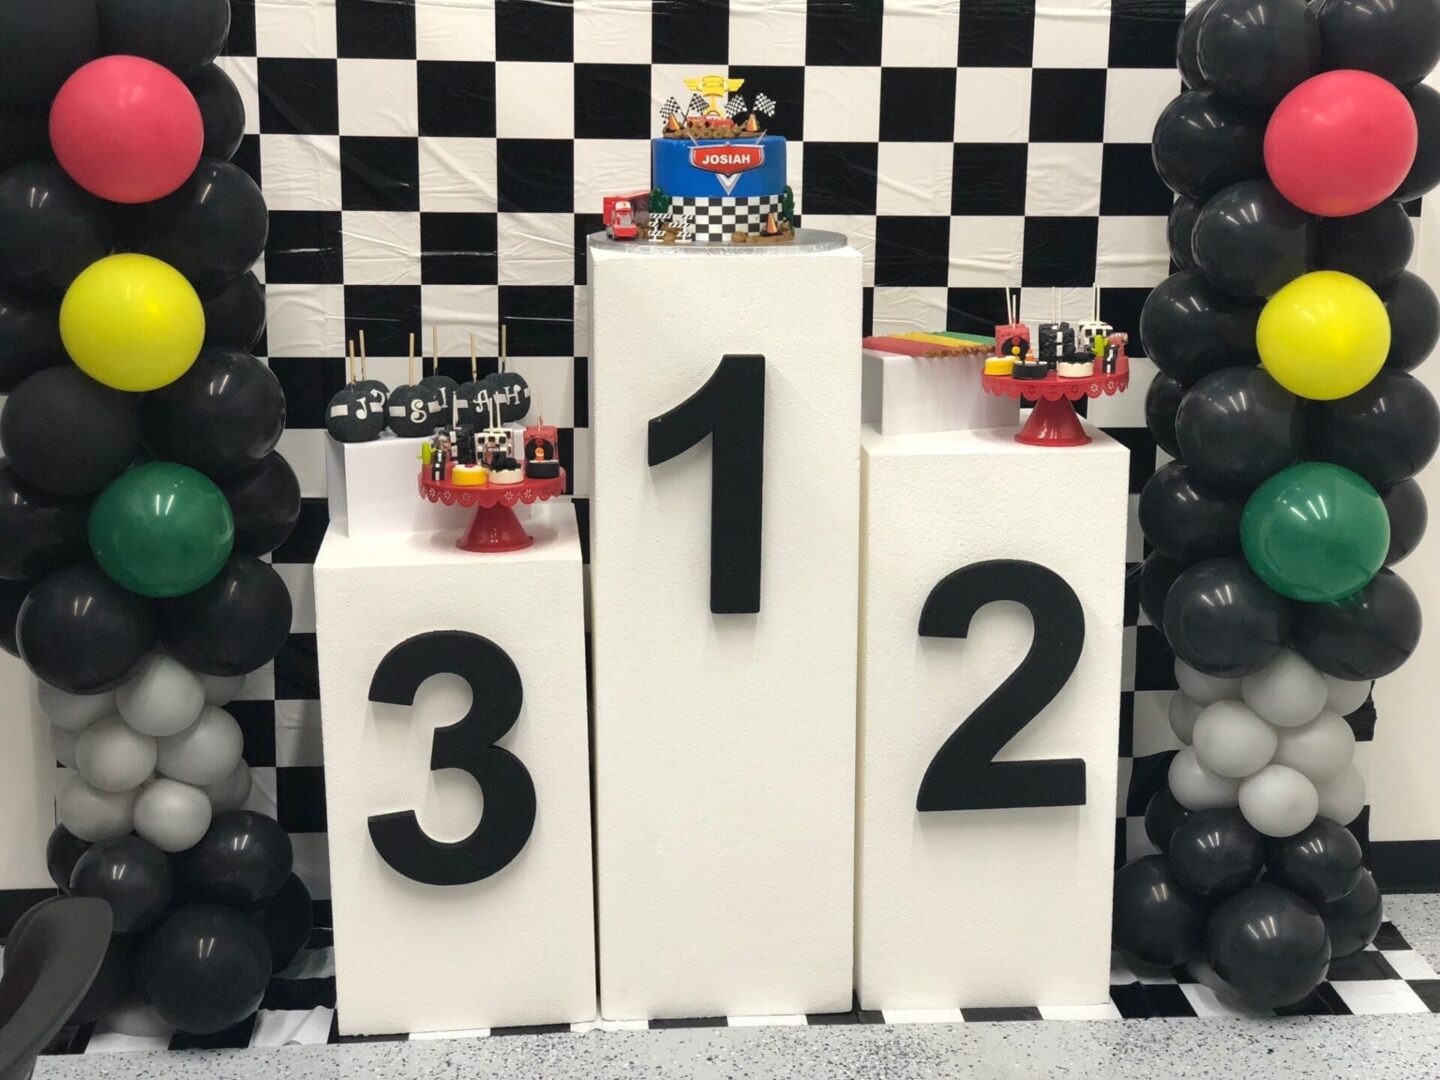 A podium with three different levels and balloons